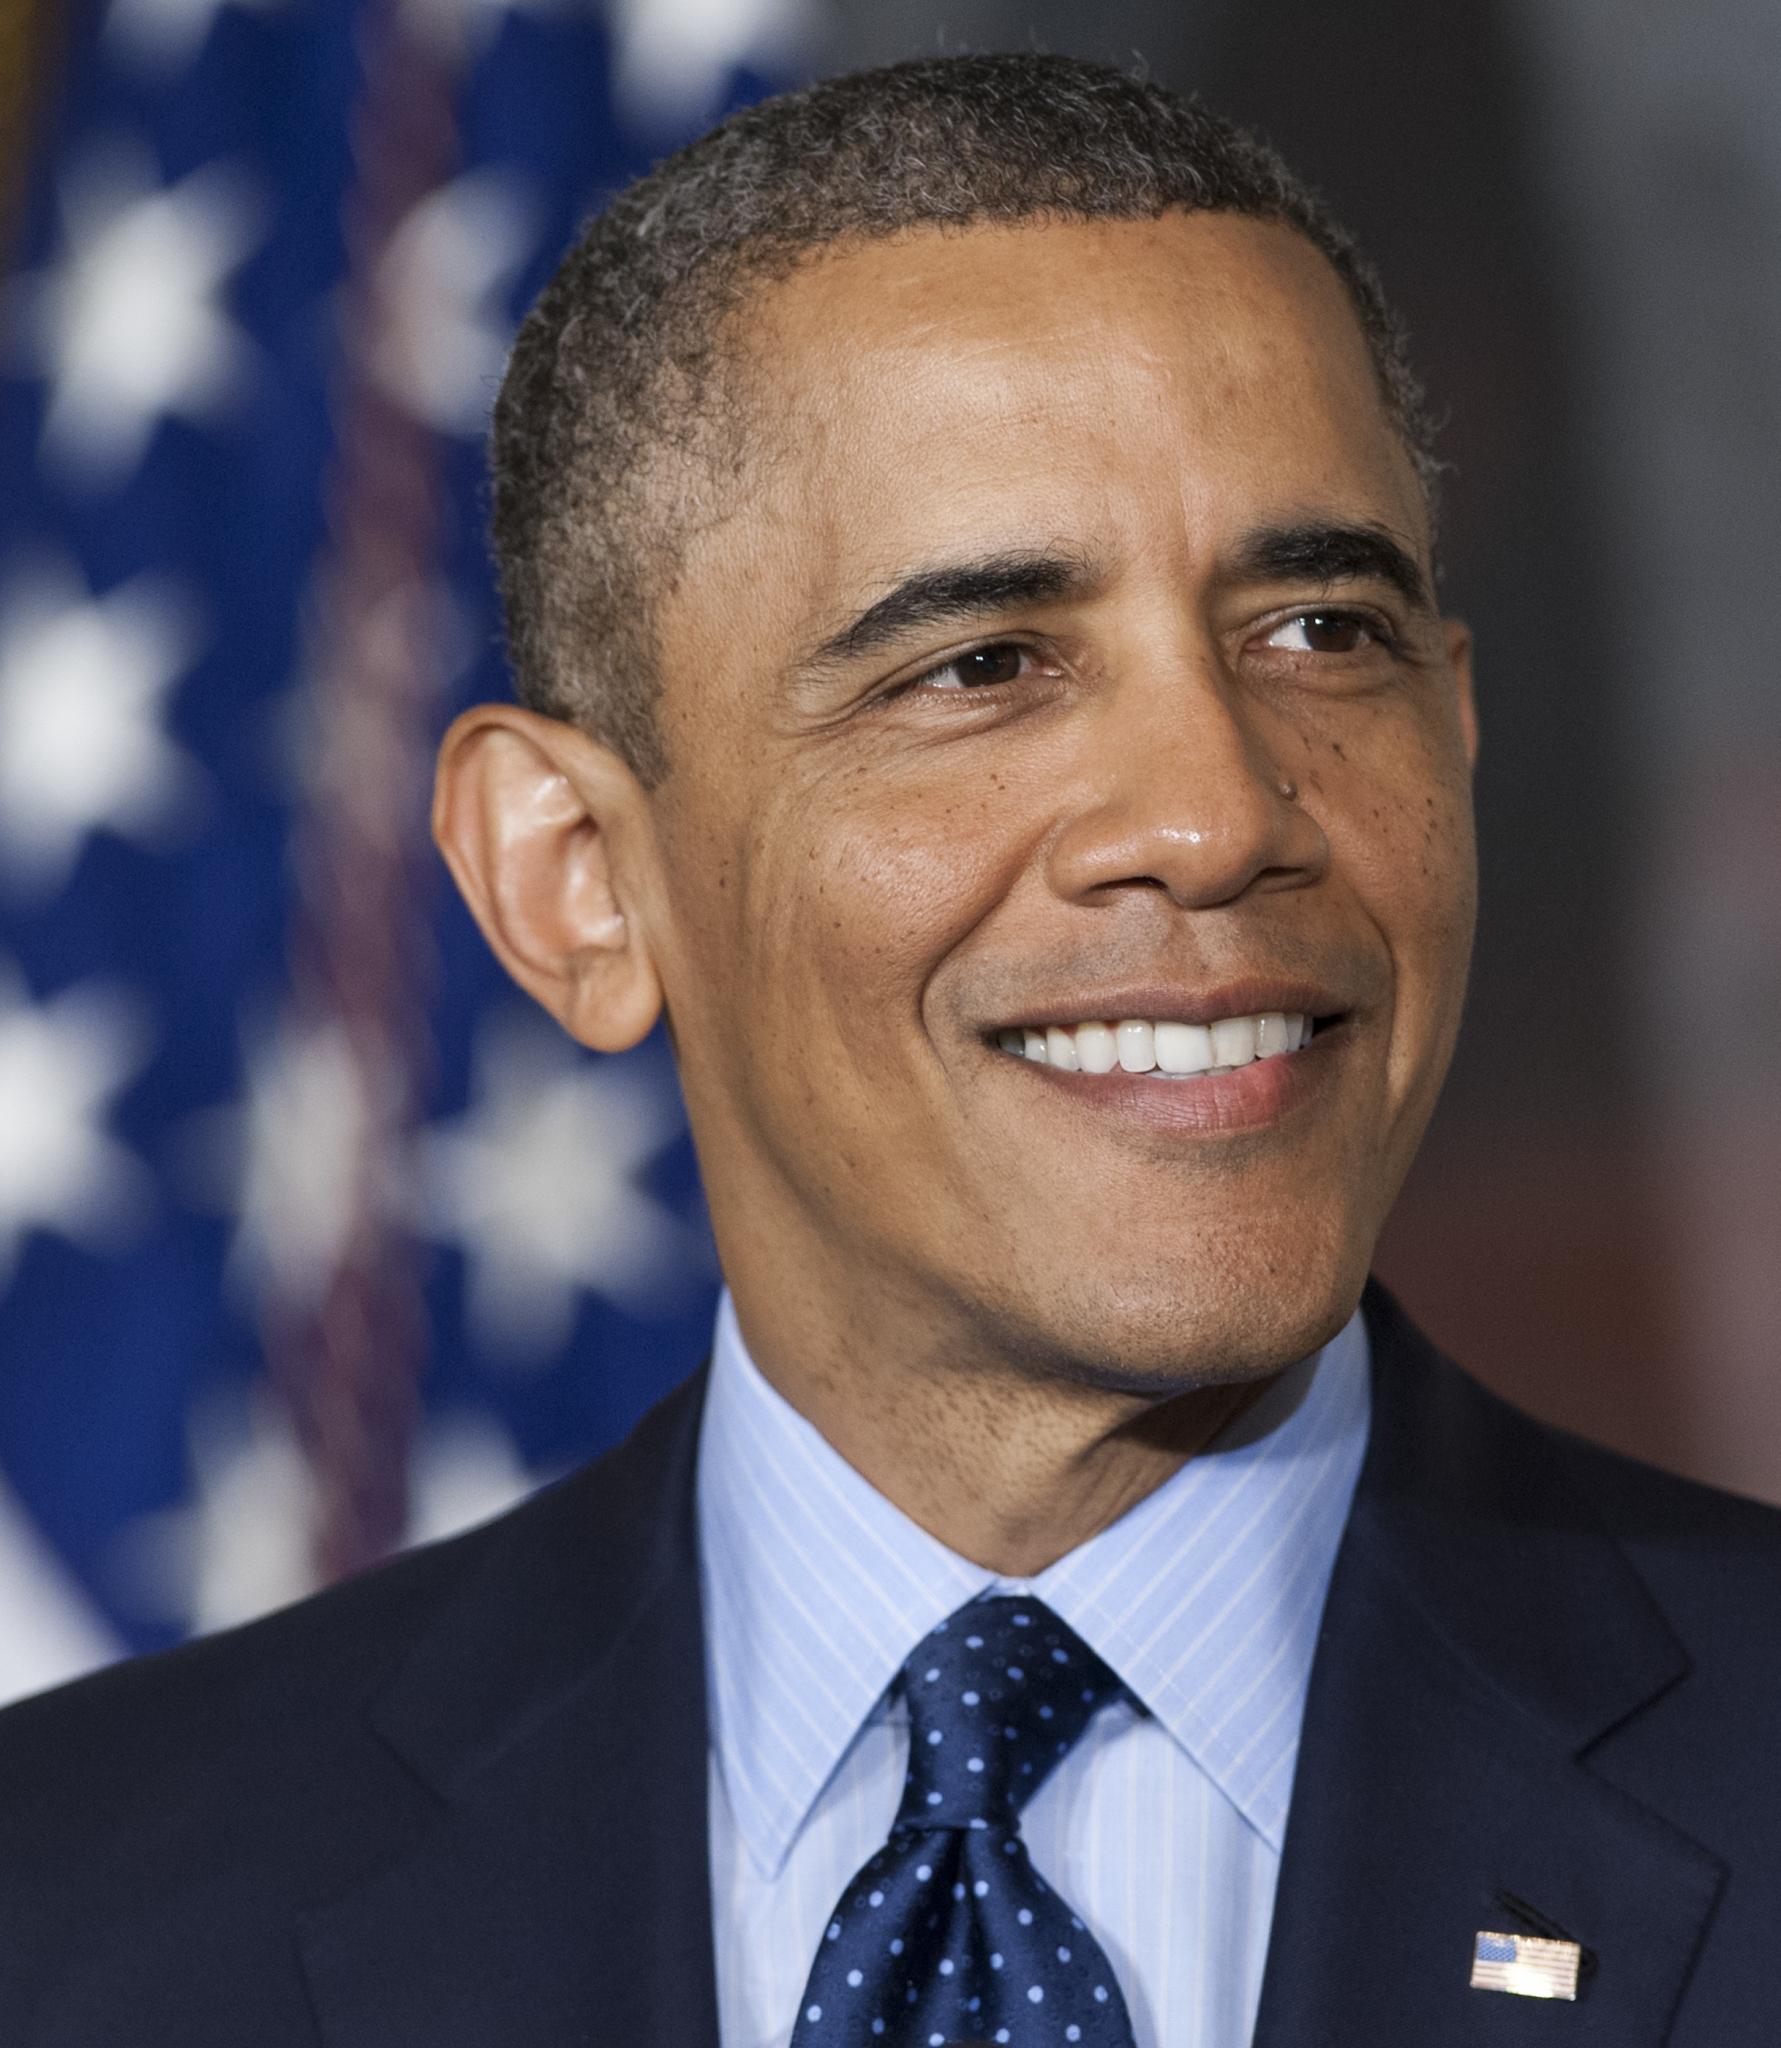 What President Obama's 'My Brother's Keeper' Initiative Means for Black Men in America